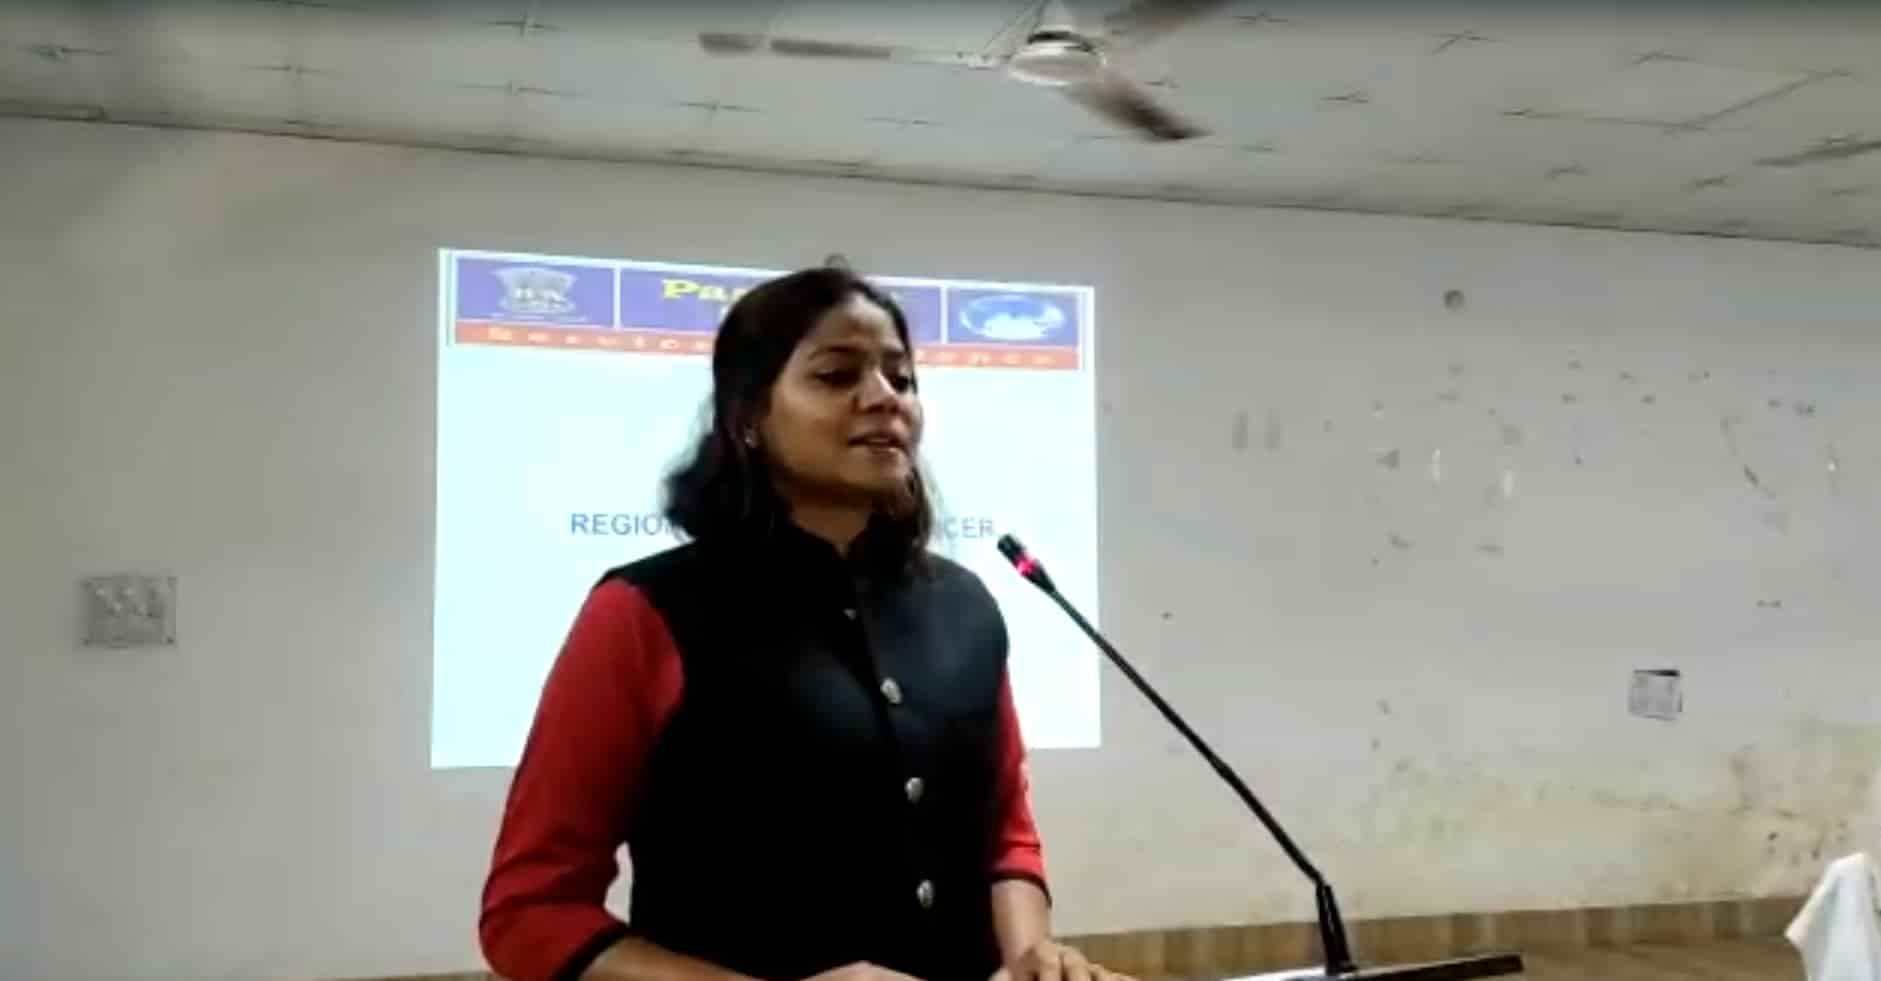 Ranchi Regional Passport Officer Manita K. promises an expedited police verification process for passports, aiming to reduce the waiting time to a week.